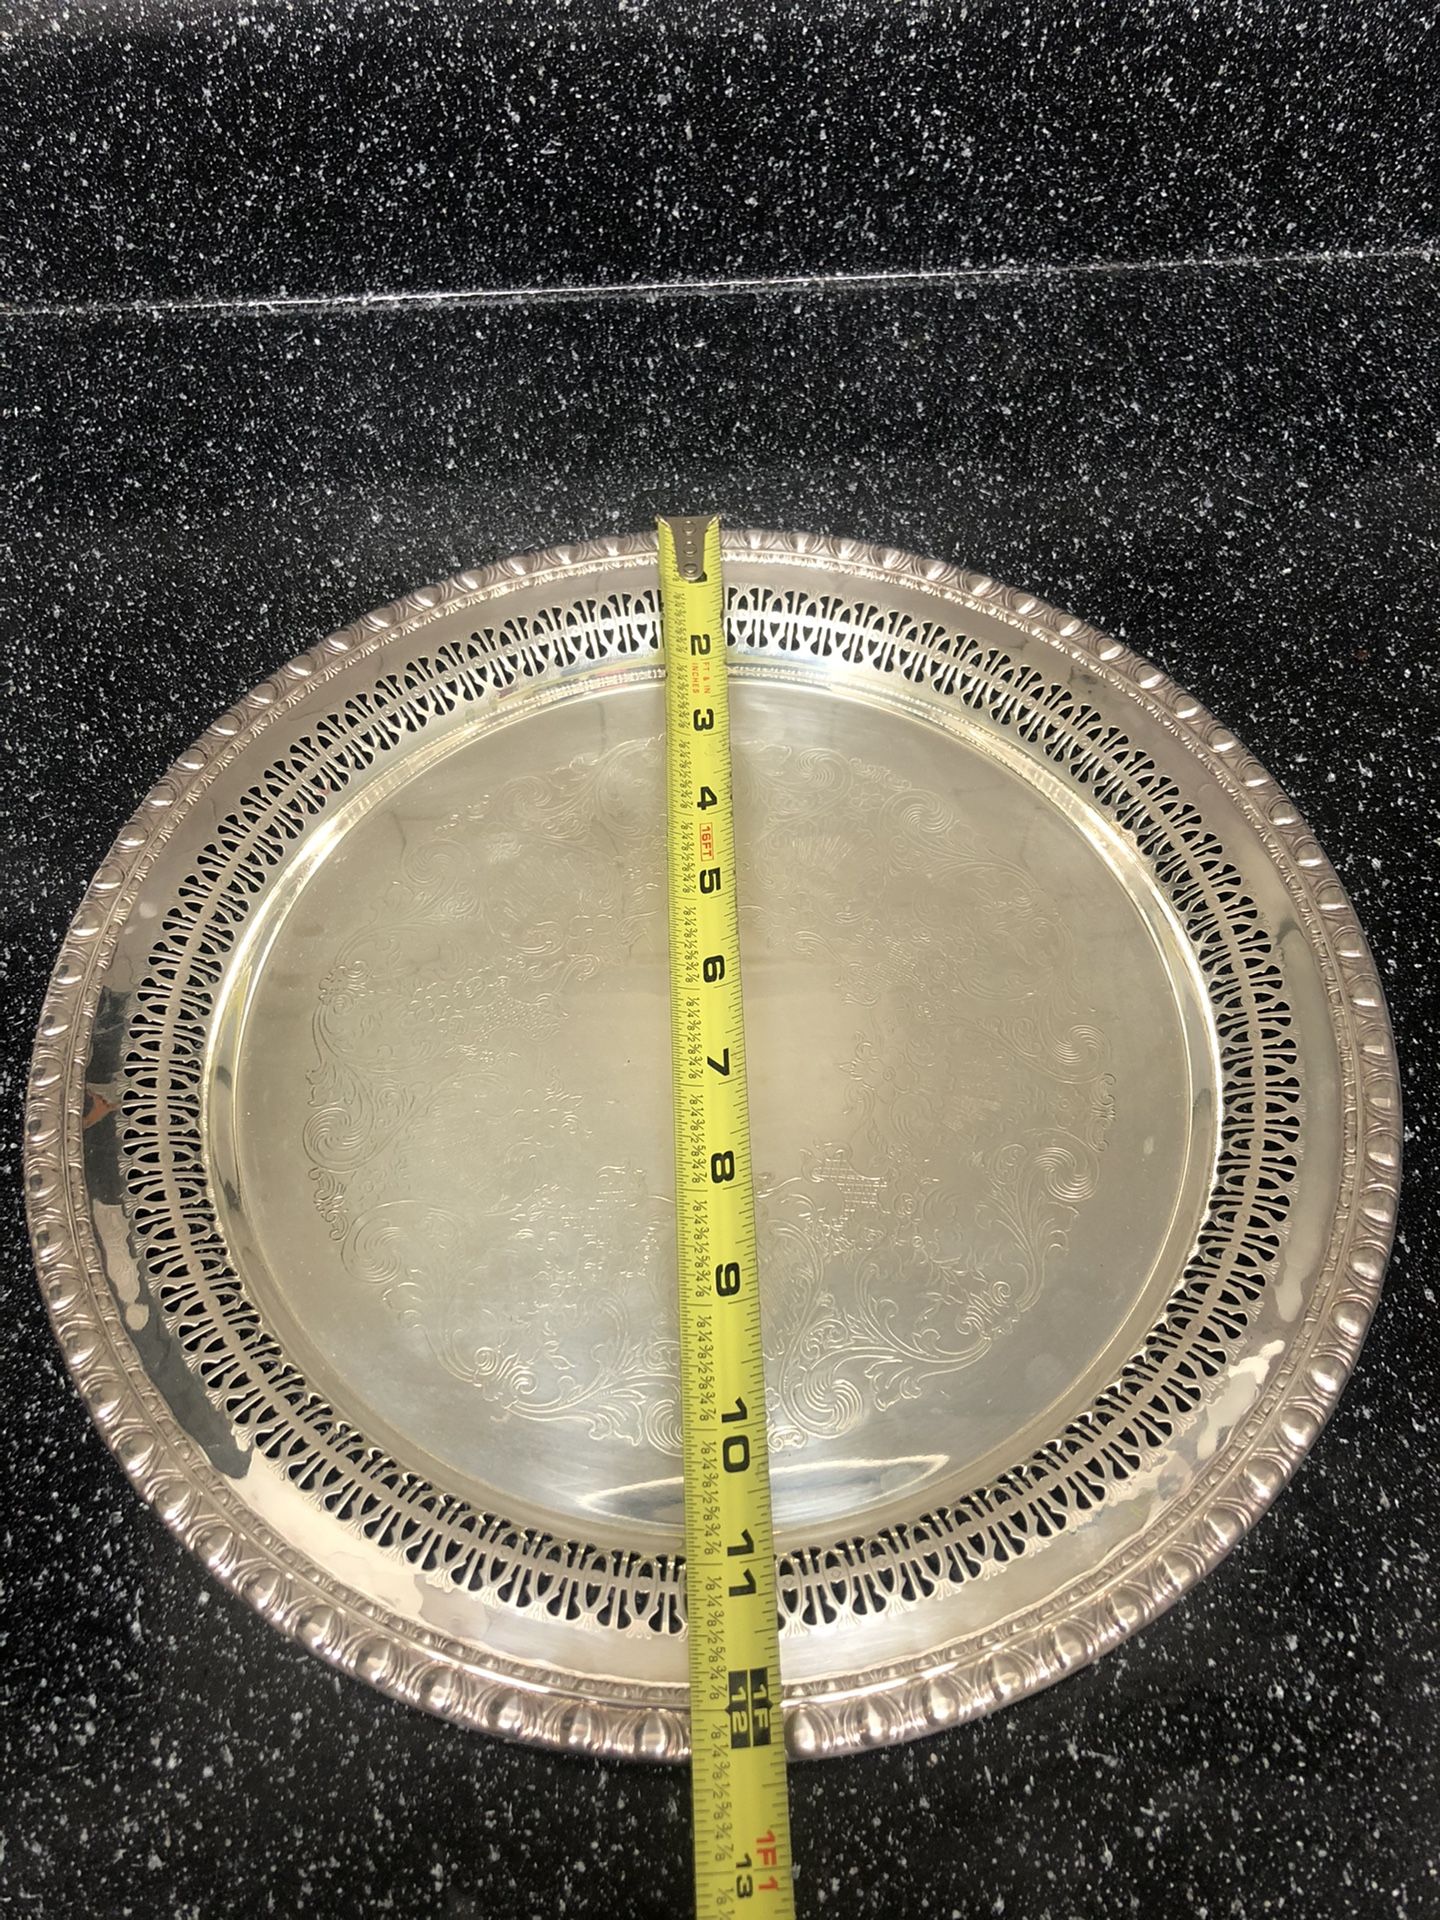 Vintage Round Silver Tray  # 1770 Good Condition By Rogers Bro